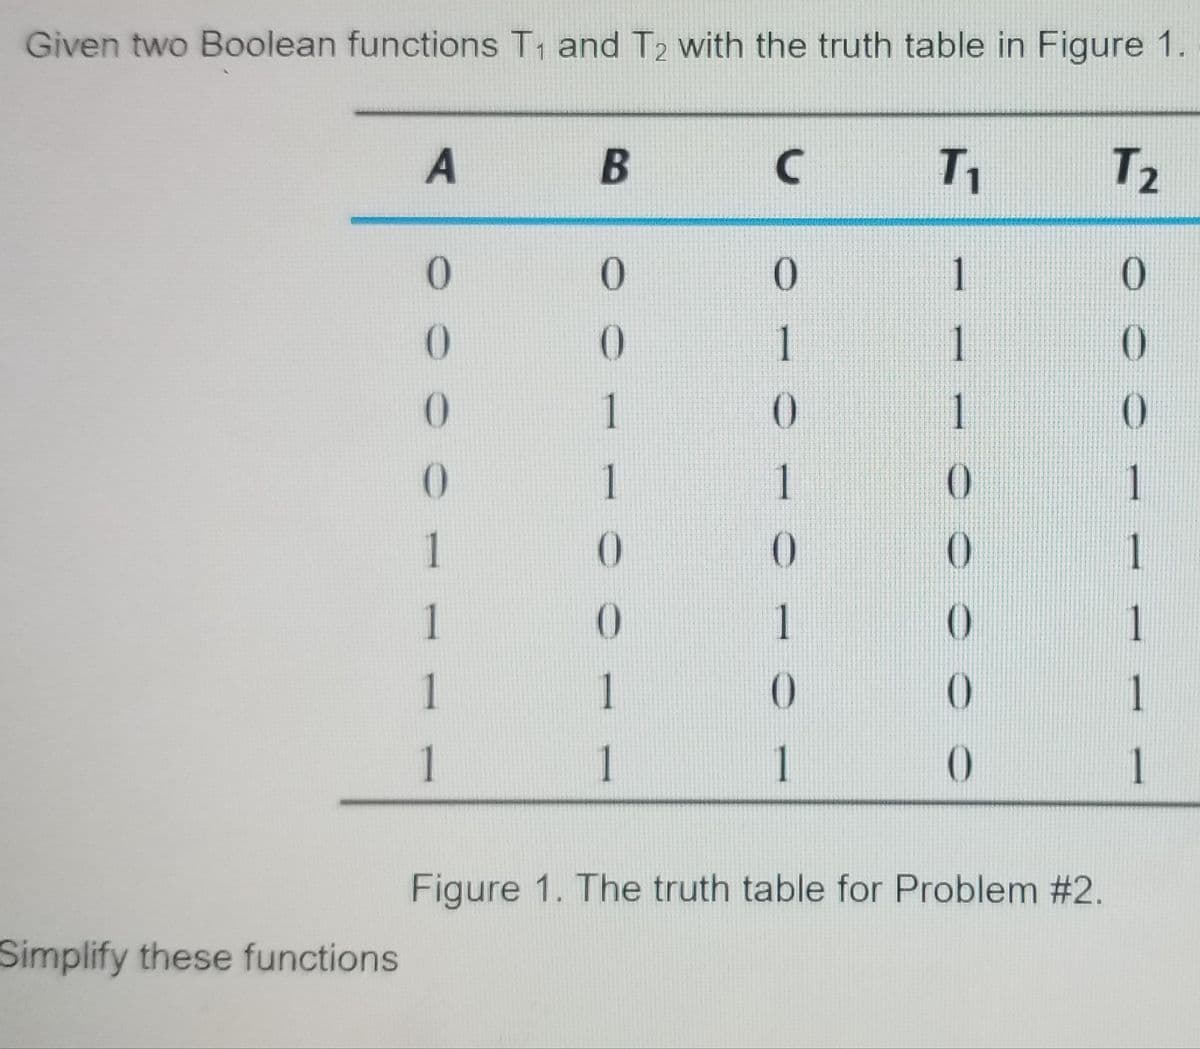 Given two Boolean functions T: and T2 with the truth table in Figure 1.
B
T1
イ2
0.
1
1
1
1
1
1
1
1
1
0.
1
1
1
1
1
1
1
1
1
1
1
Figure 1. The truth table for Problem #2.
Simplify these functions
